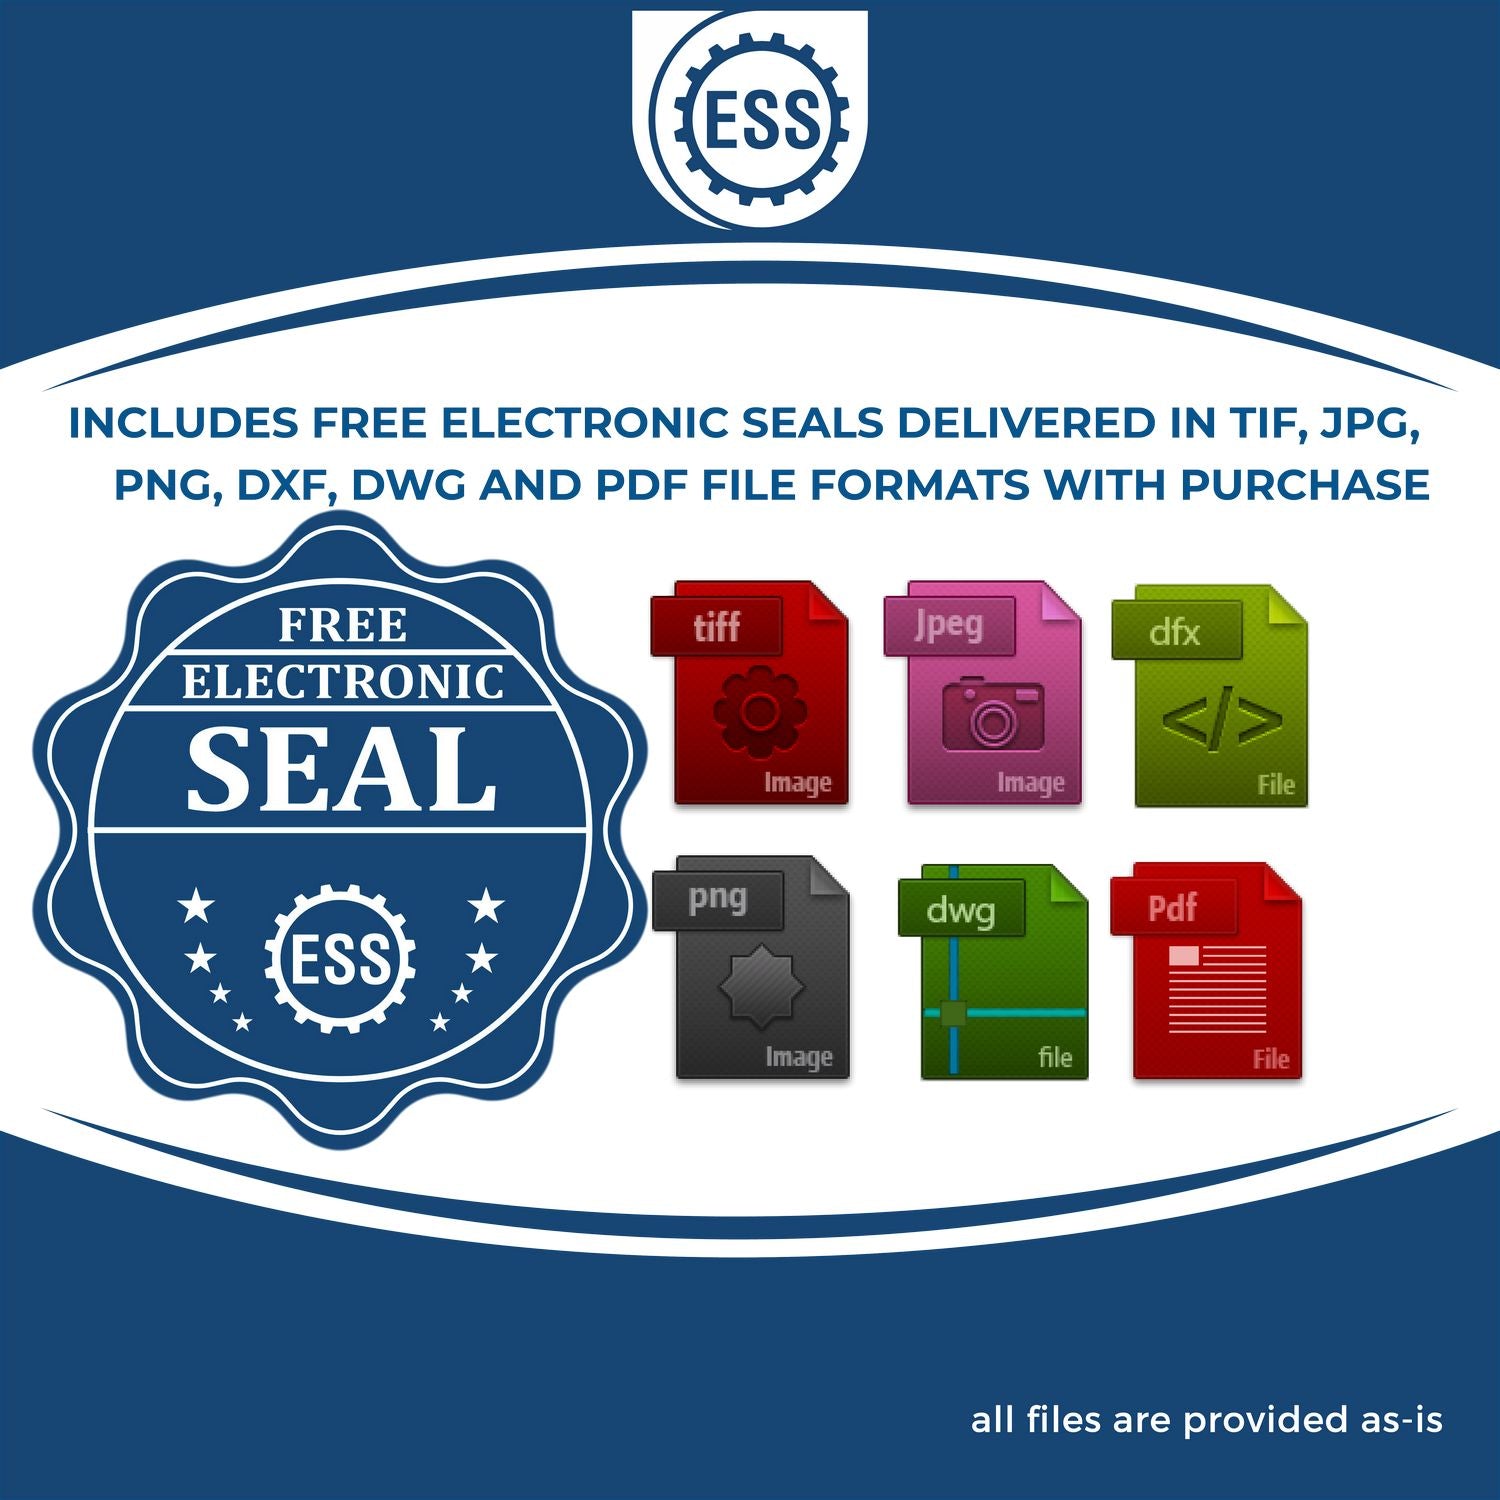 An infographic for the free electronic seal for the State of Kentucky Handheld Landscape Architect Seal illustrating the different file type icons such as DXF, DWG, TIF, JPG and PNG.